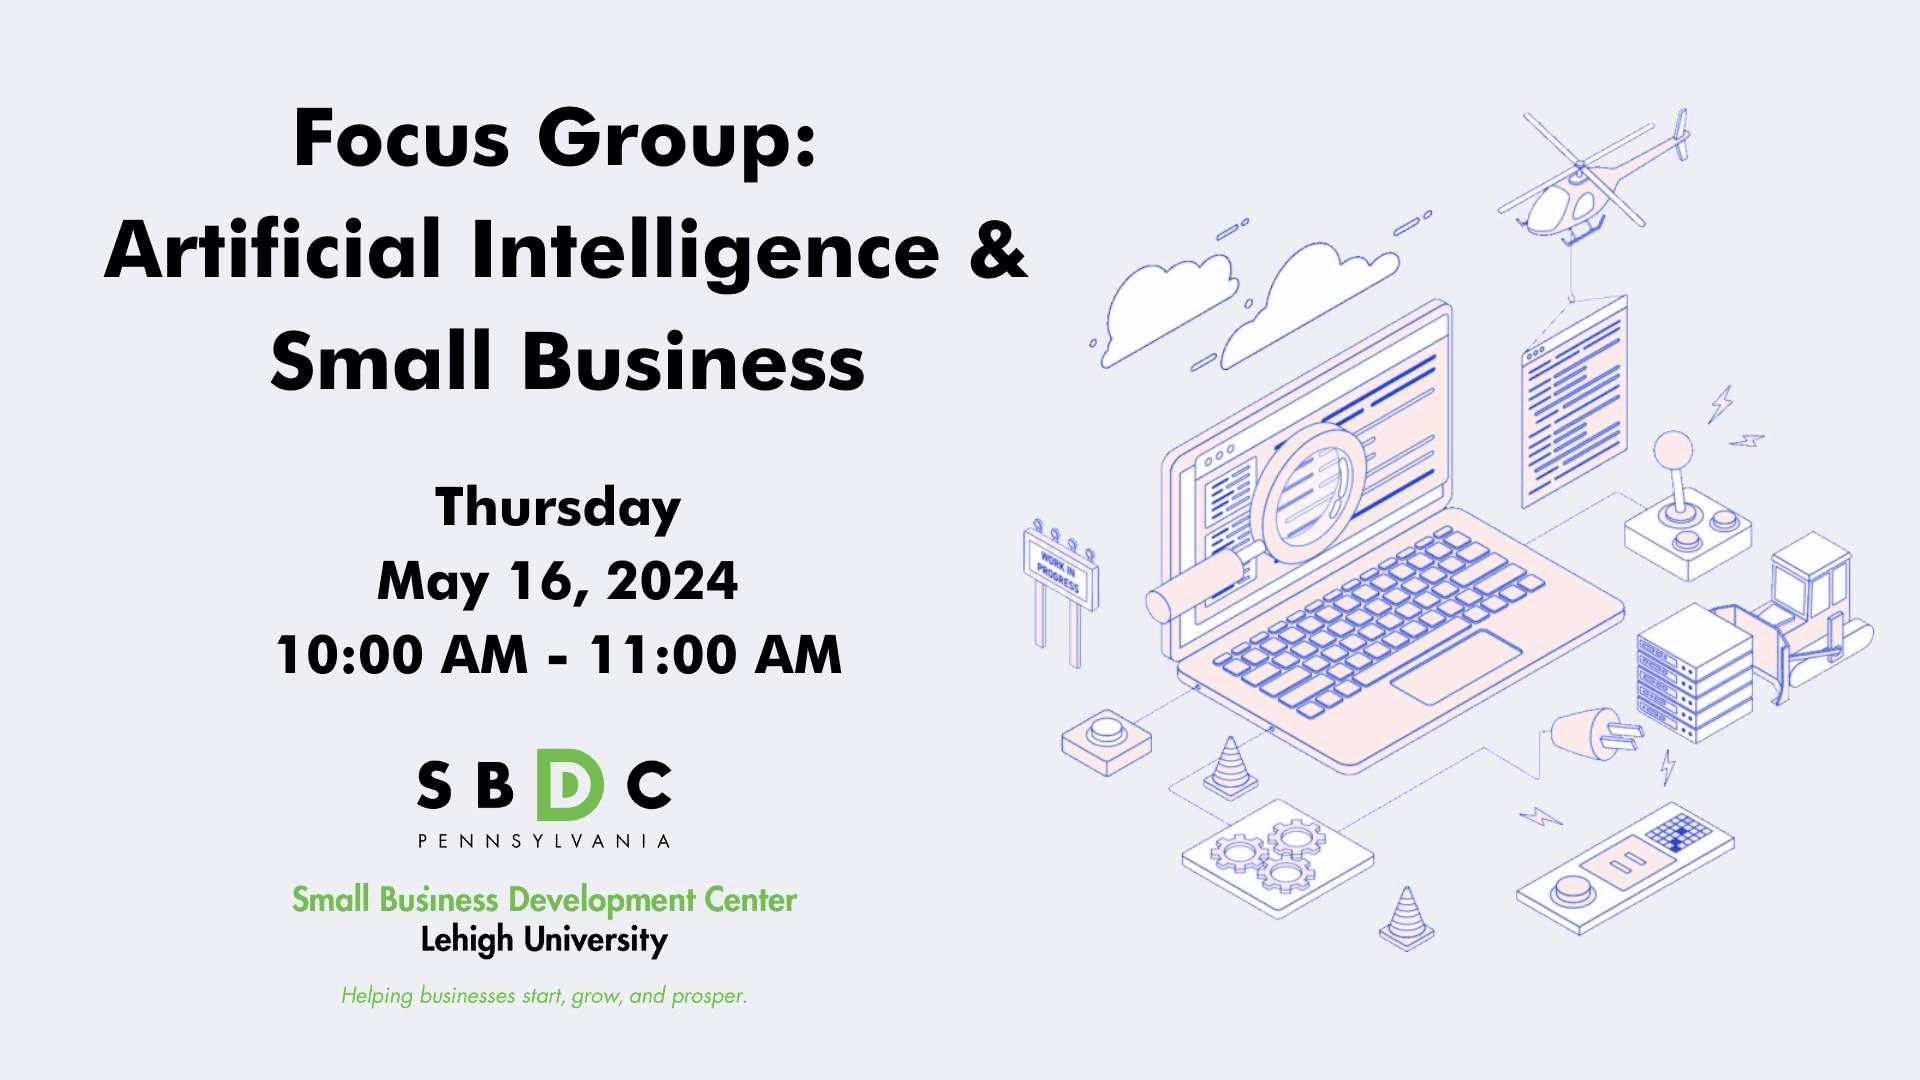 Focus Group: Artificial Intelligence & Small Business